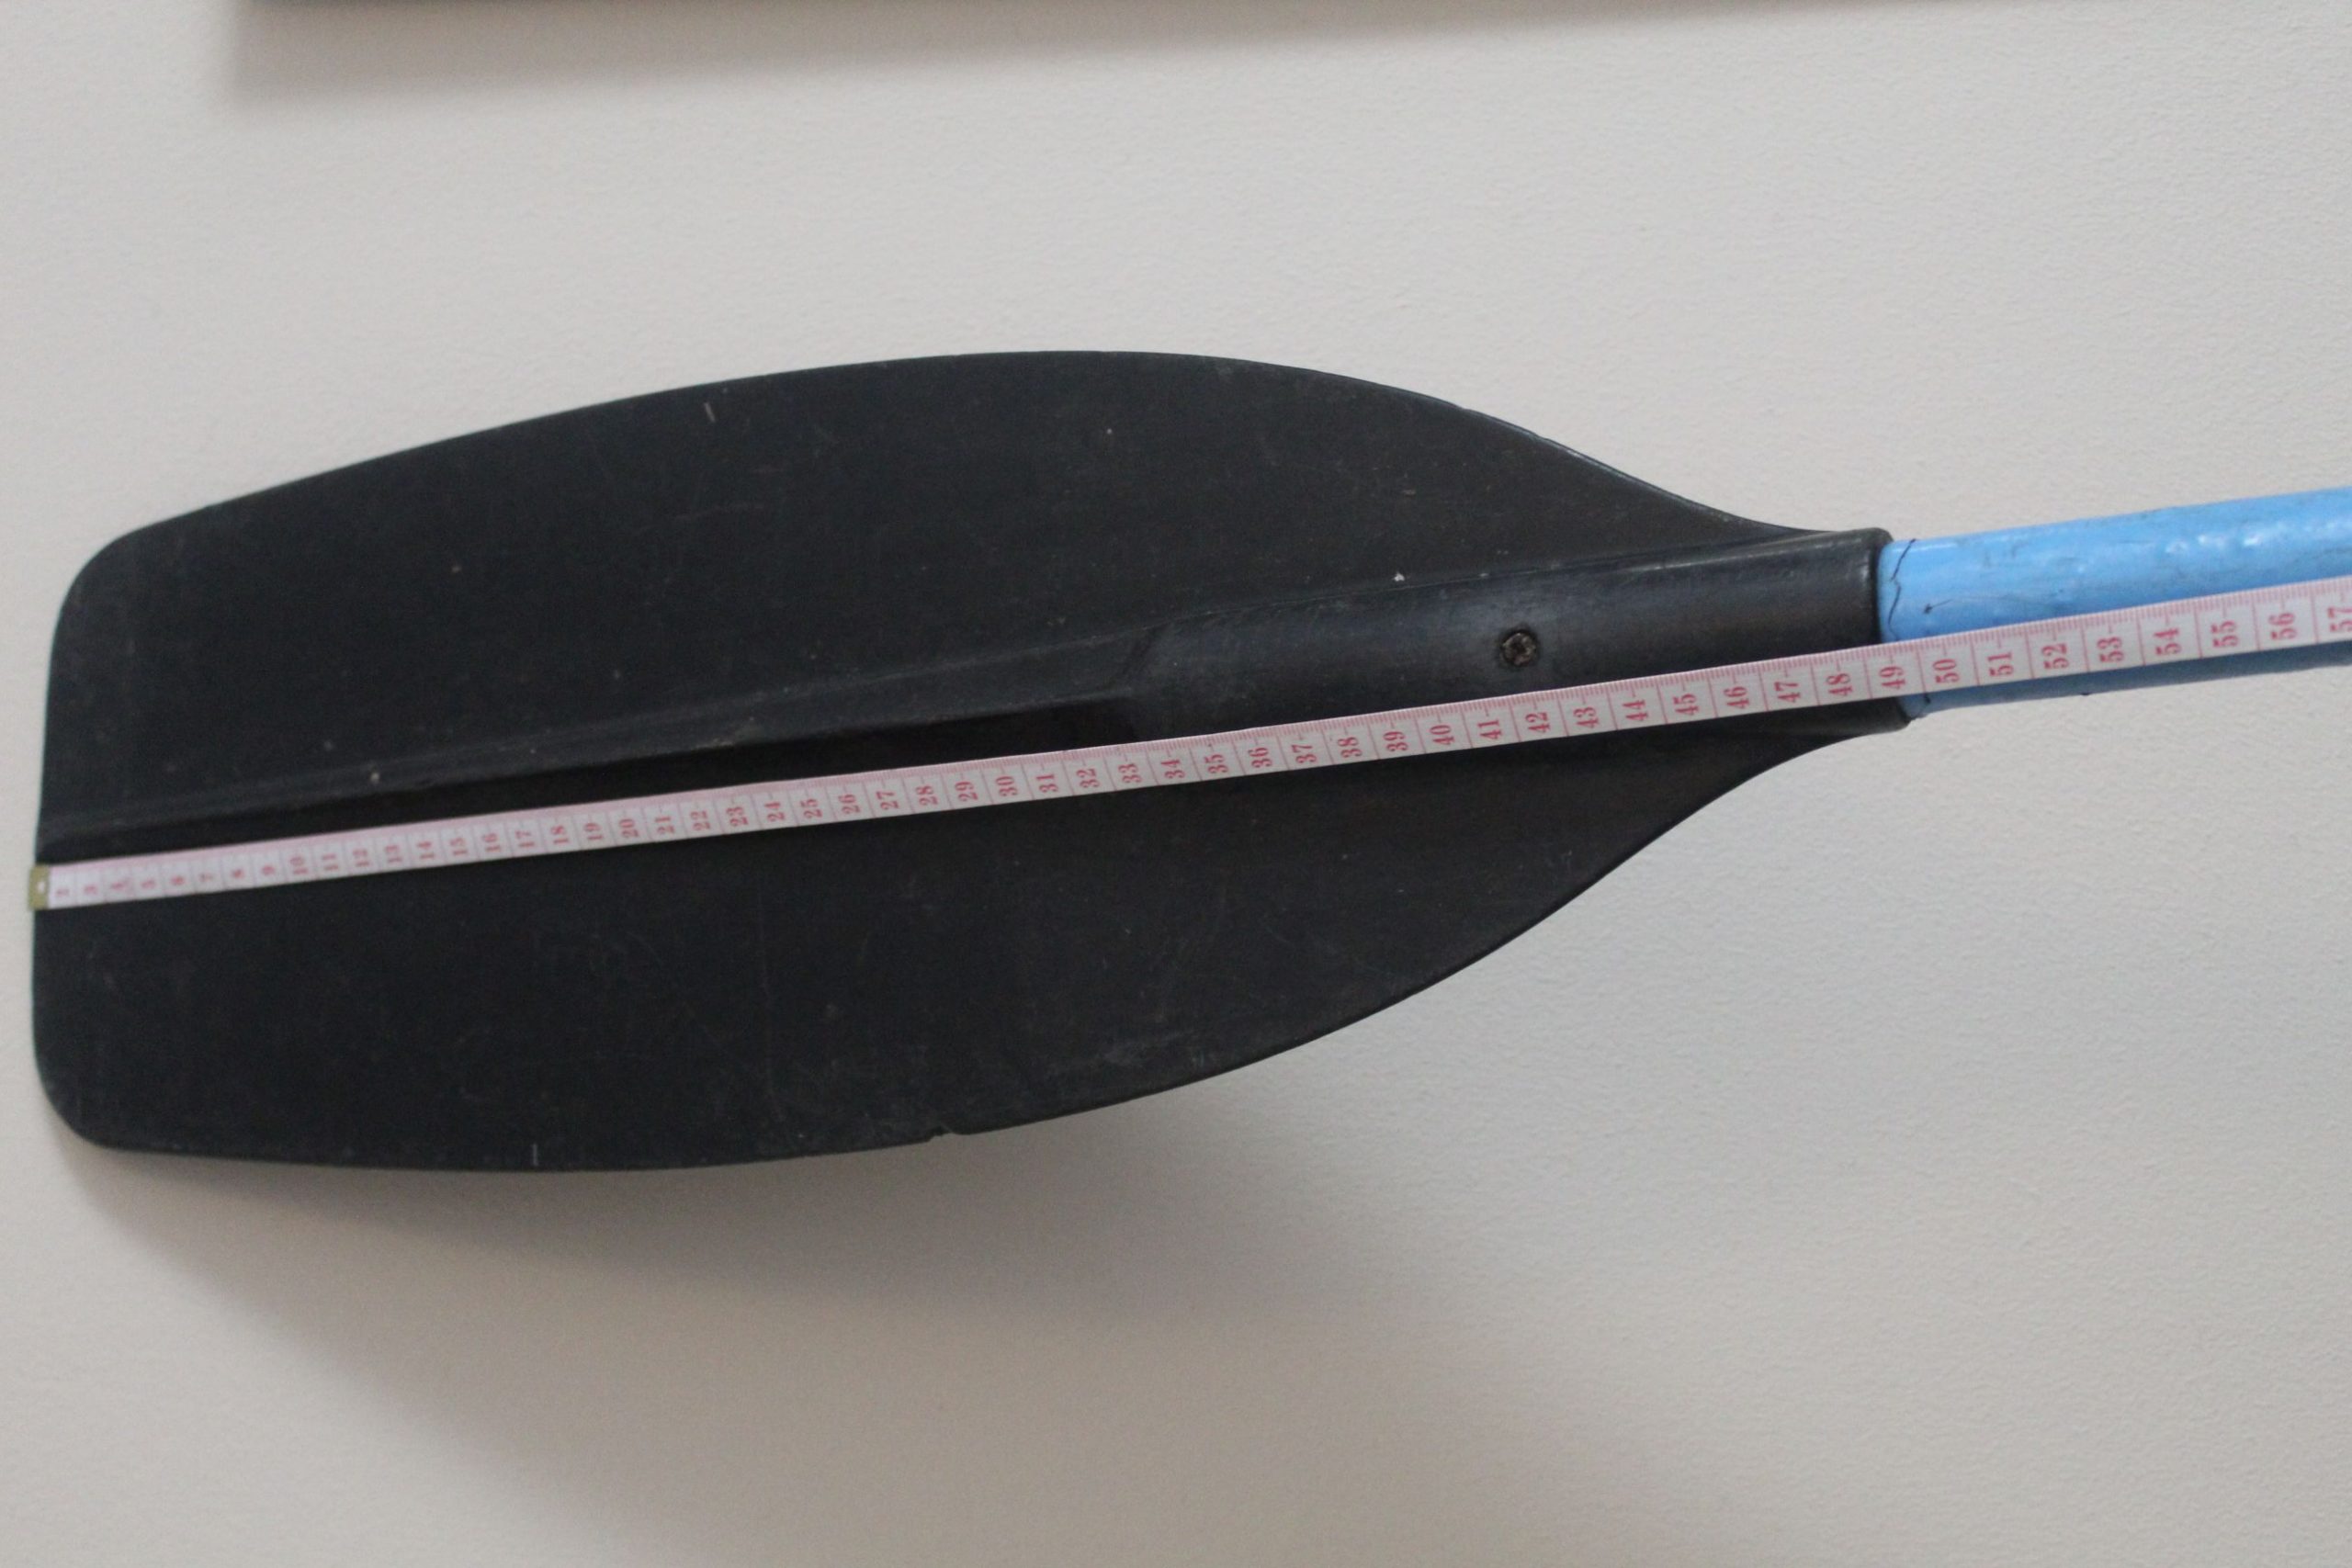 A close up of a kayak paddle with a measuring tape across it.